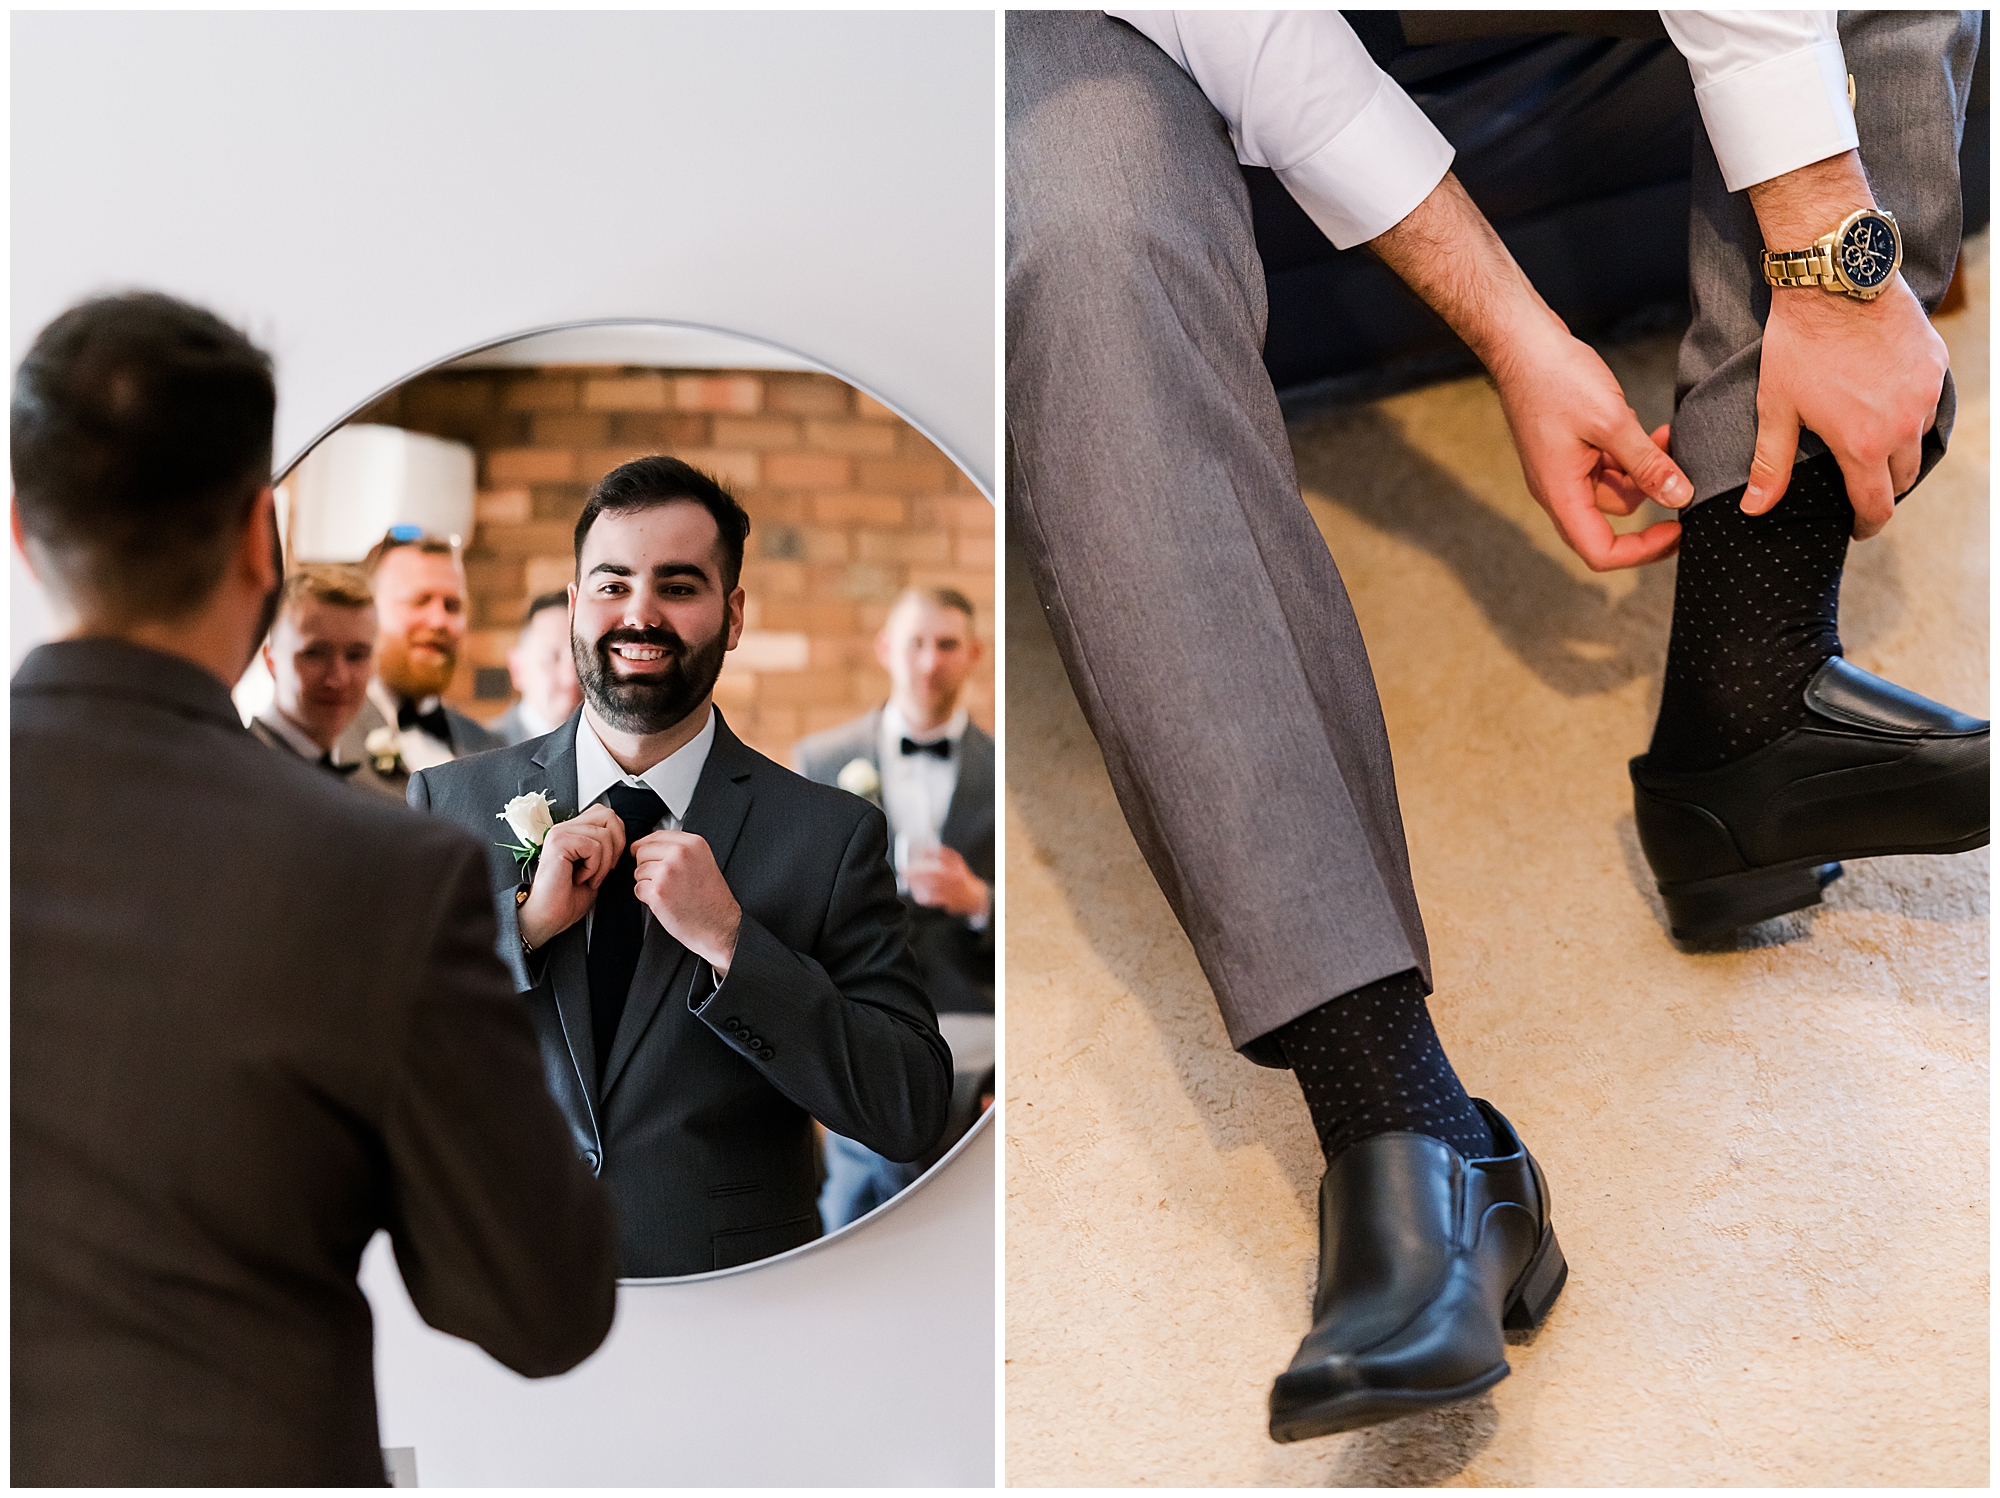 Groom tying his shoes for his wedding